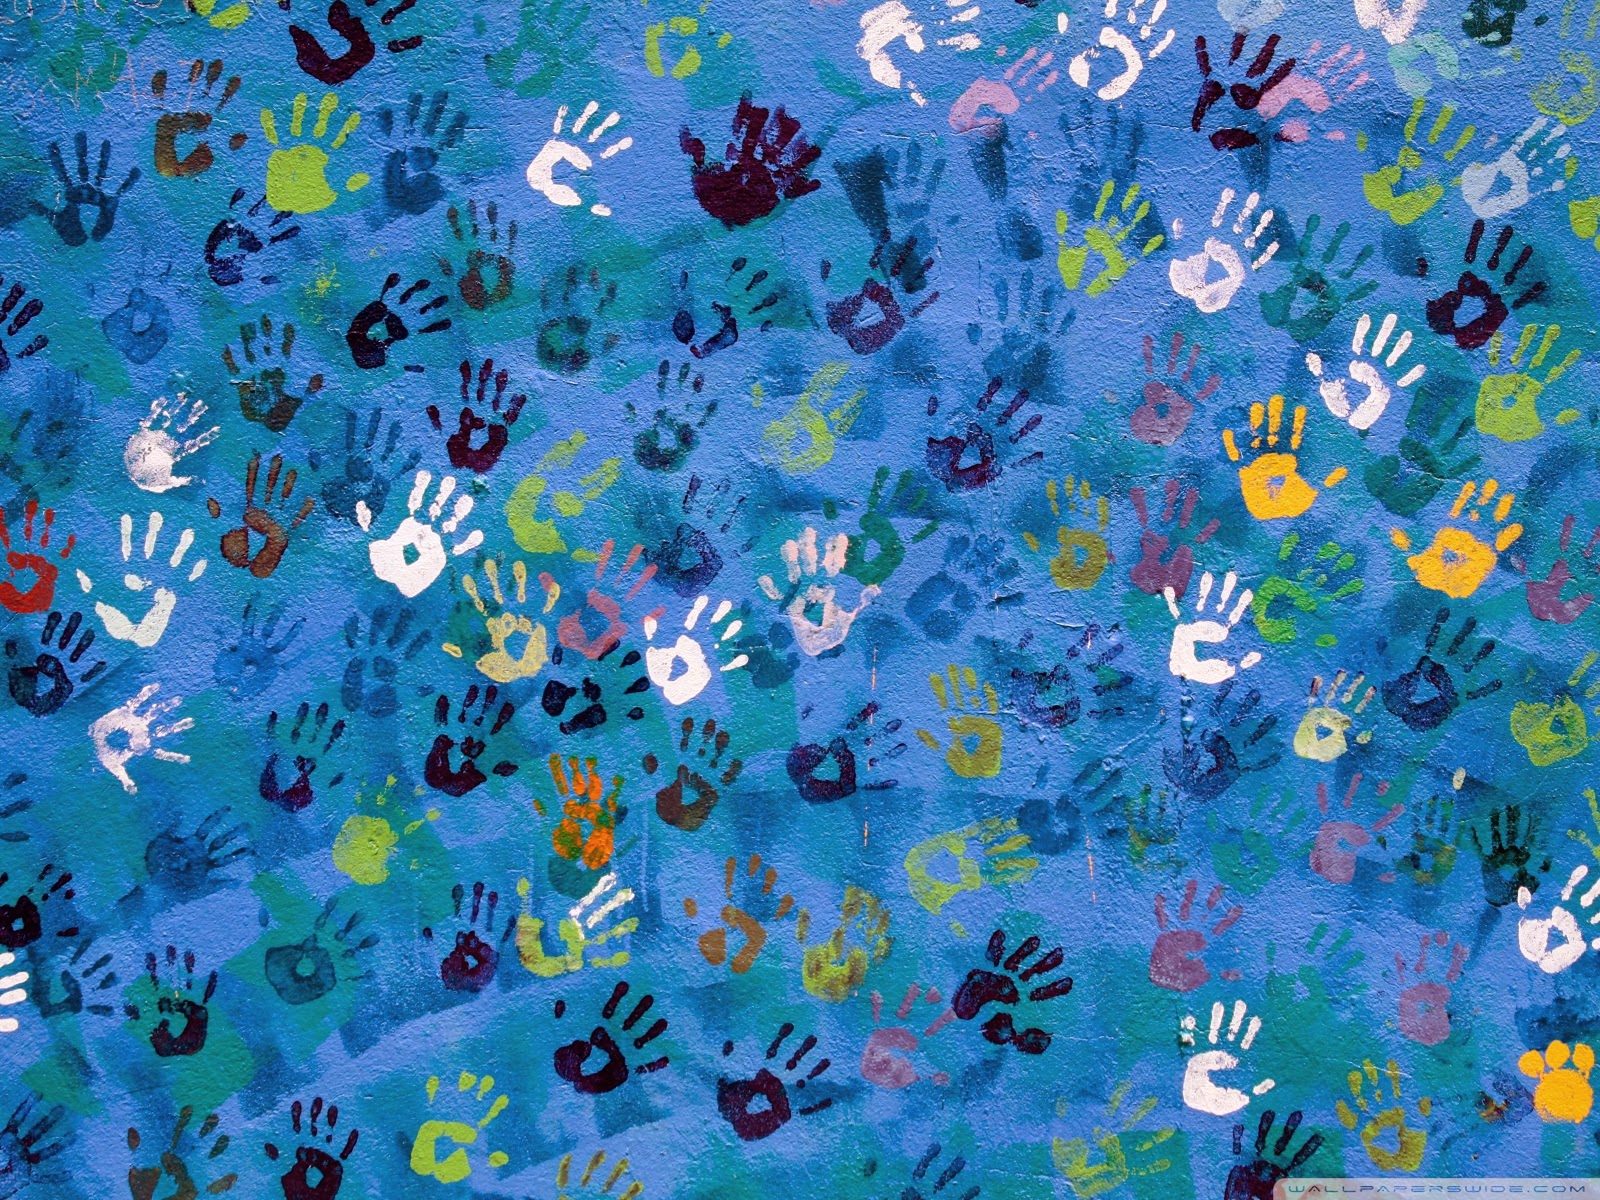 Helping Hands Images Wallpapers